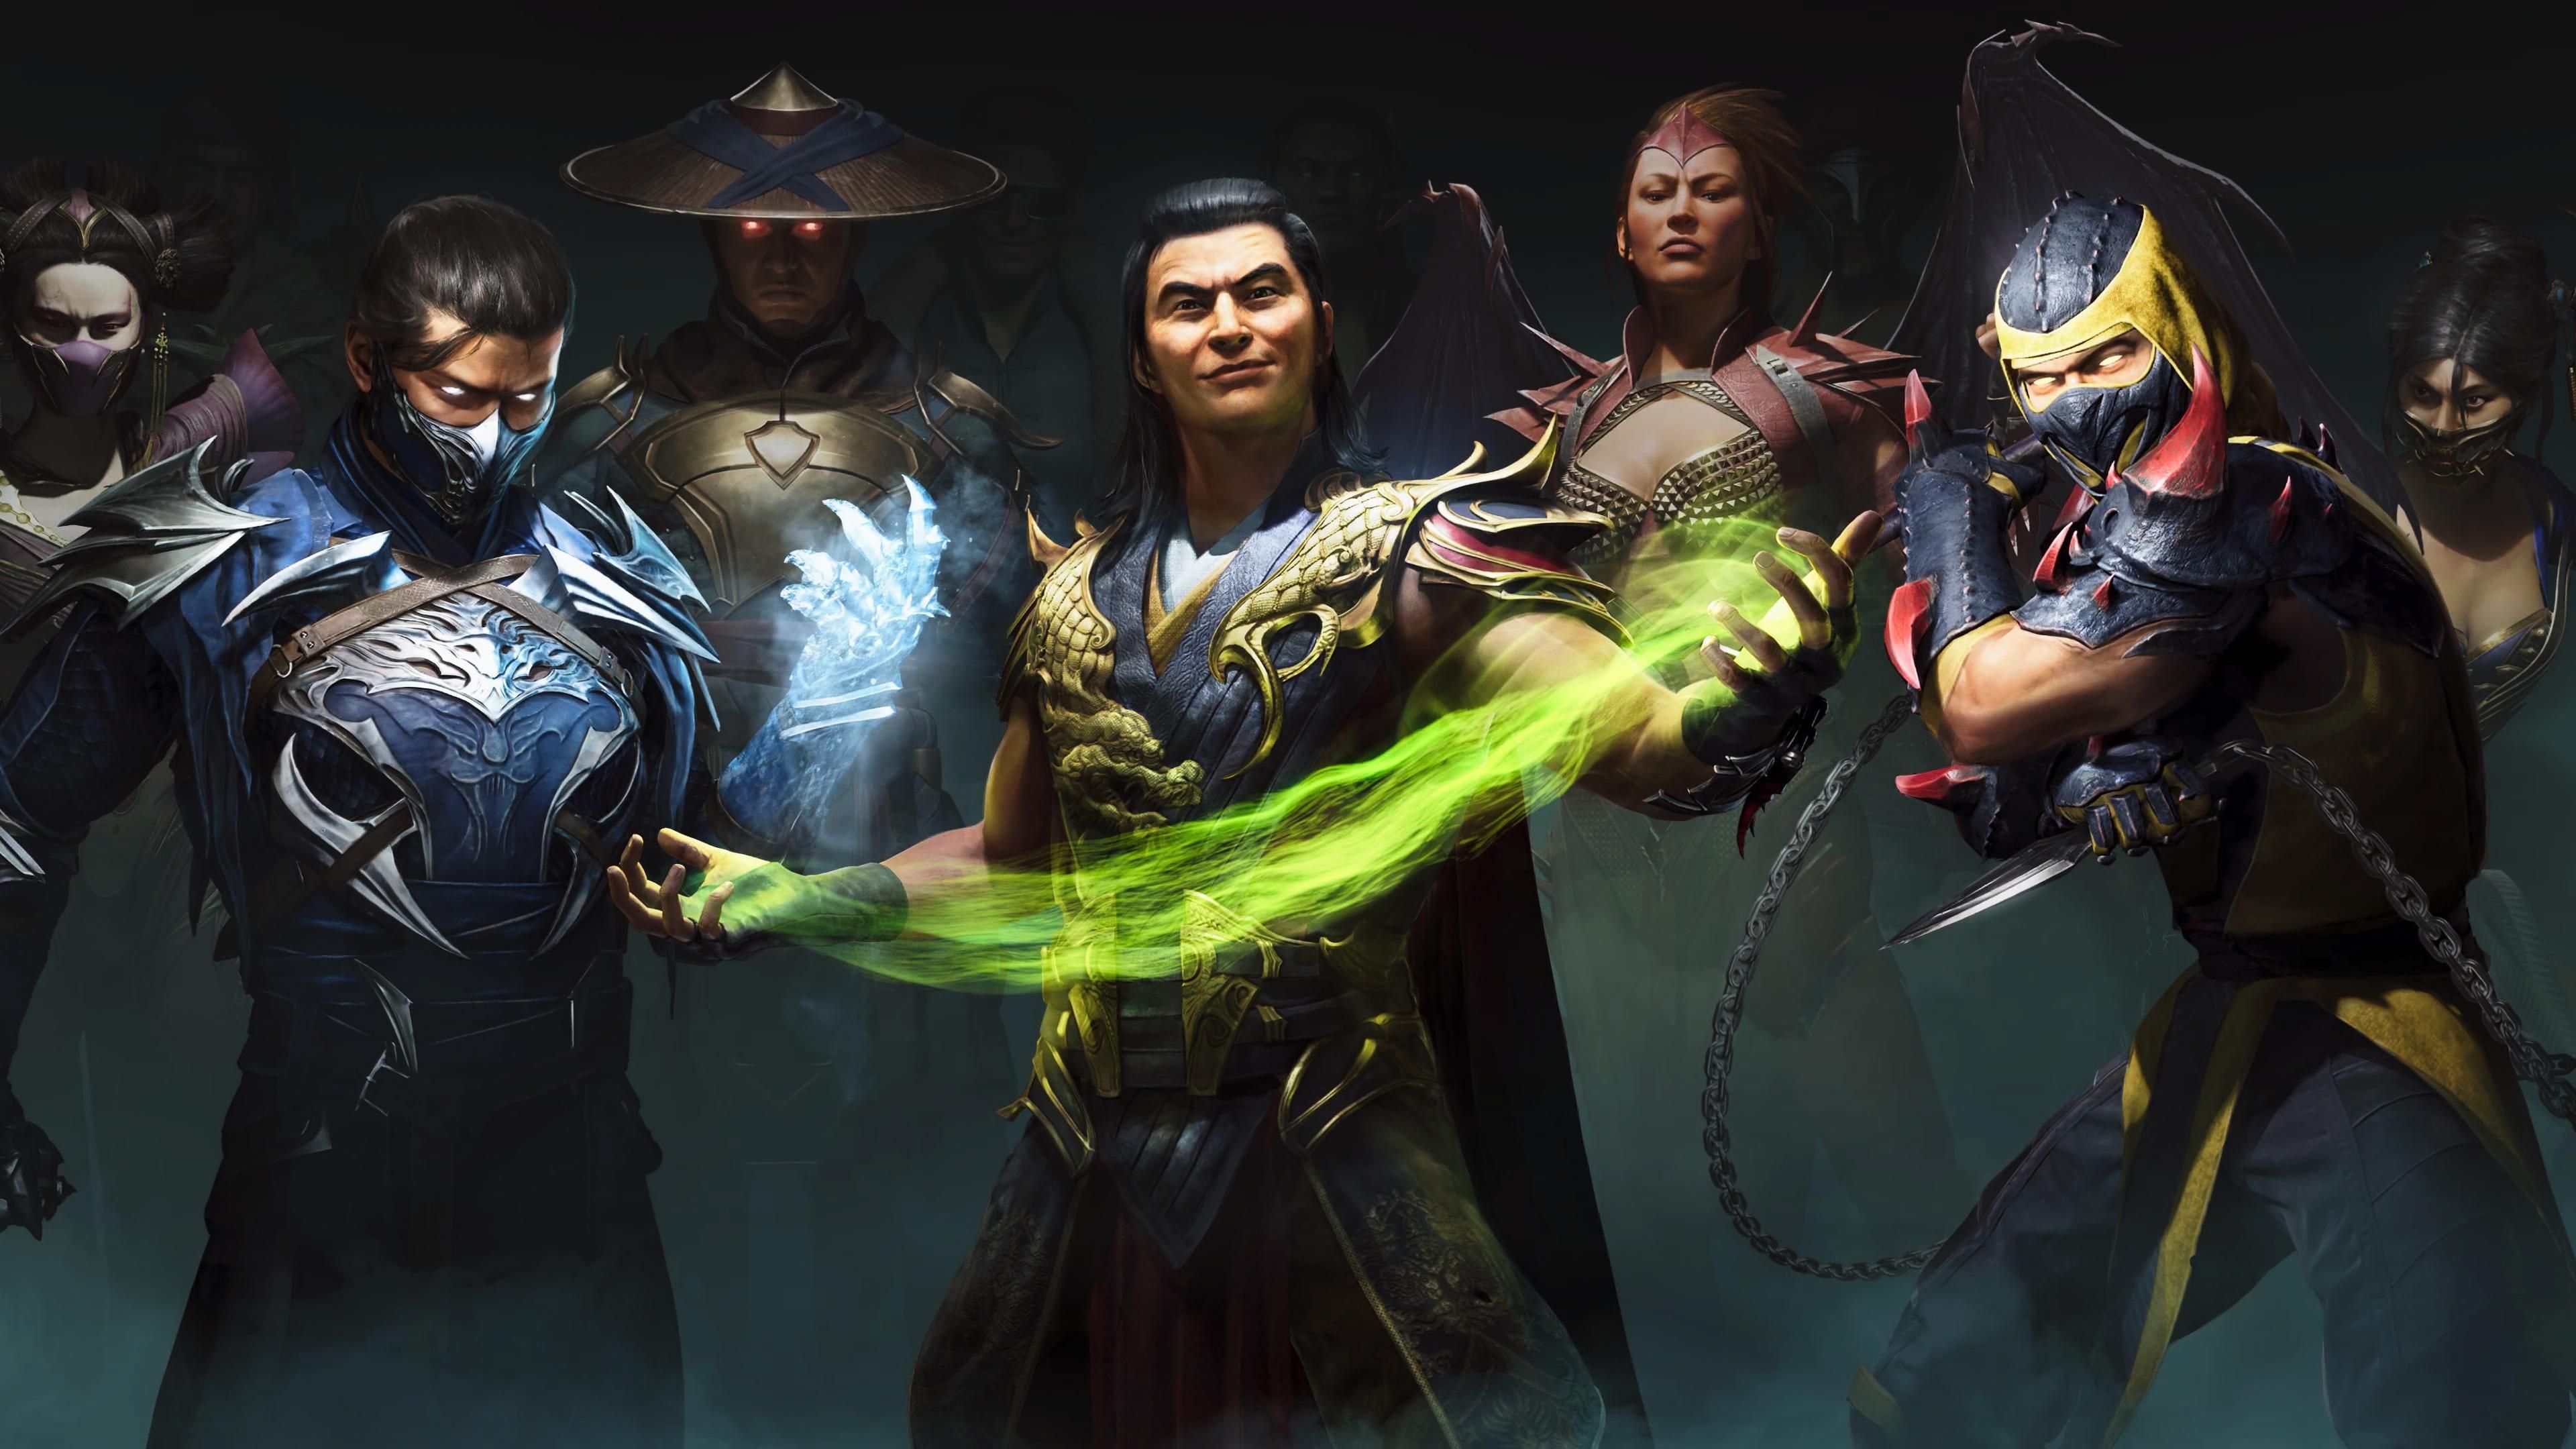 Shang Tsung and a series of alternate versions of classic characters around him.